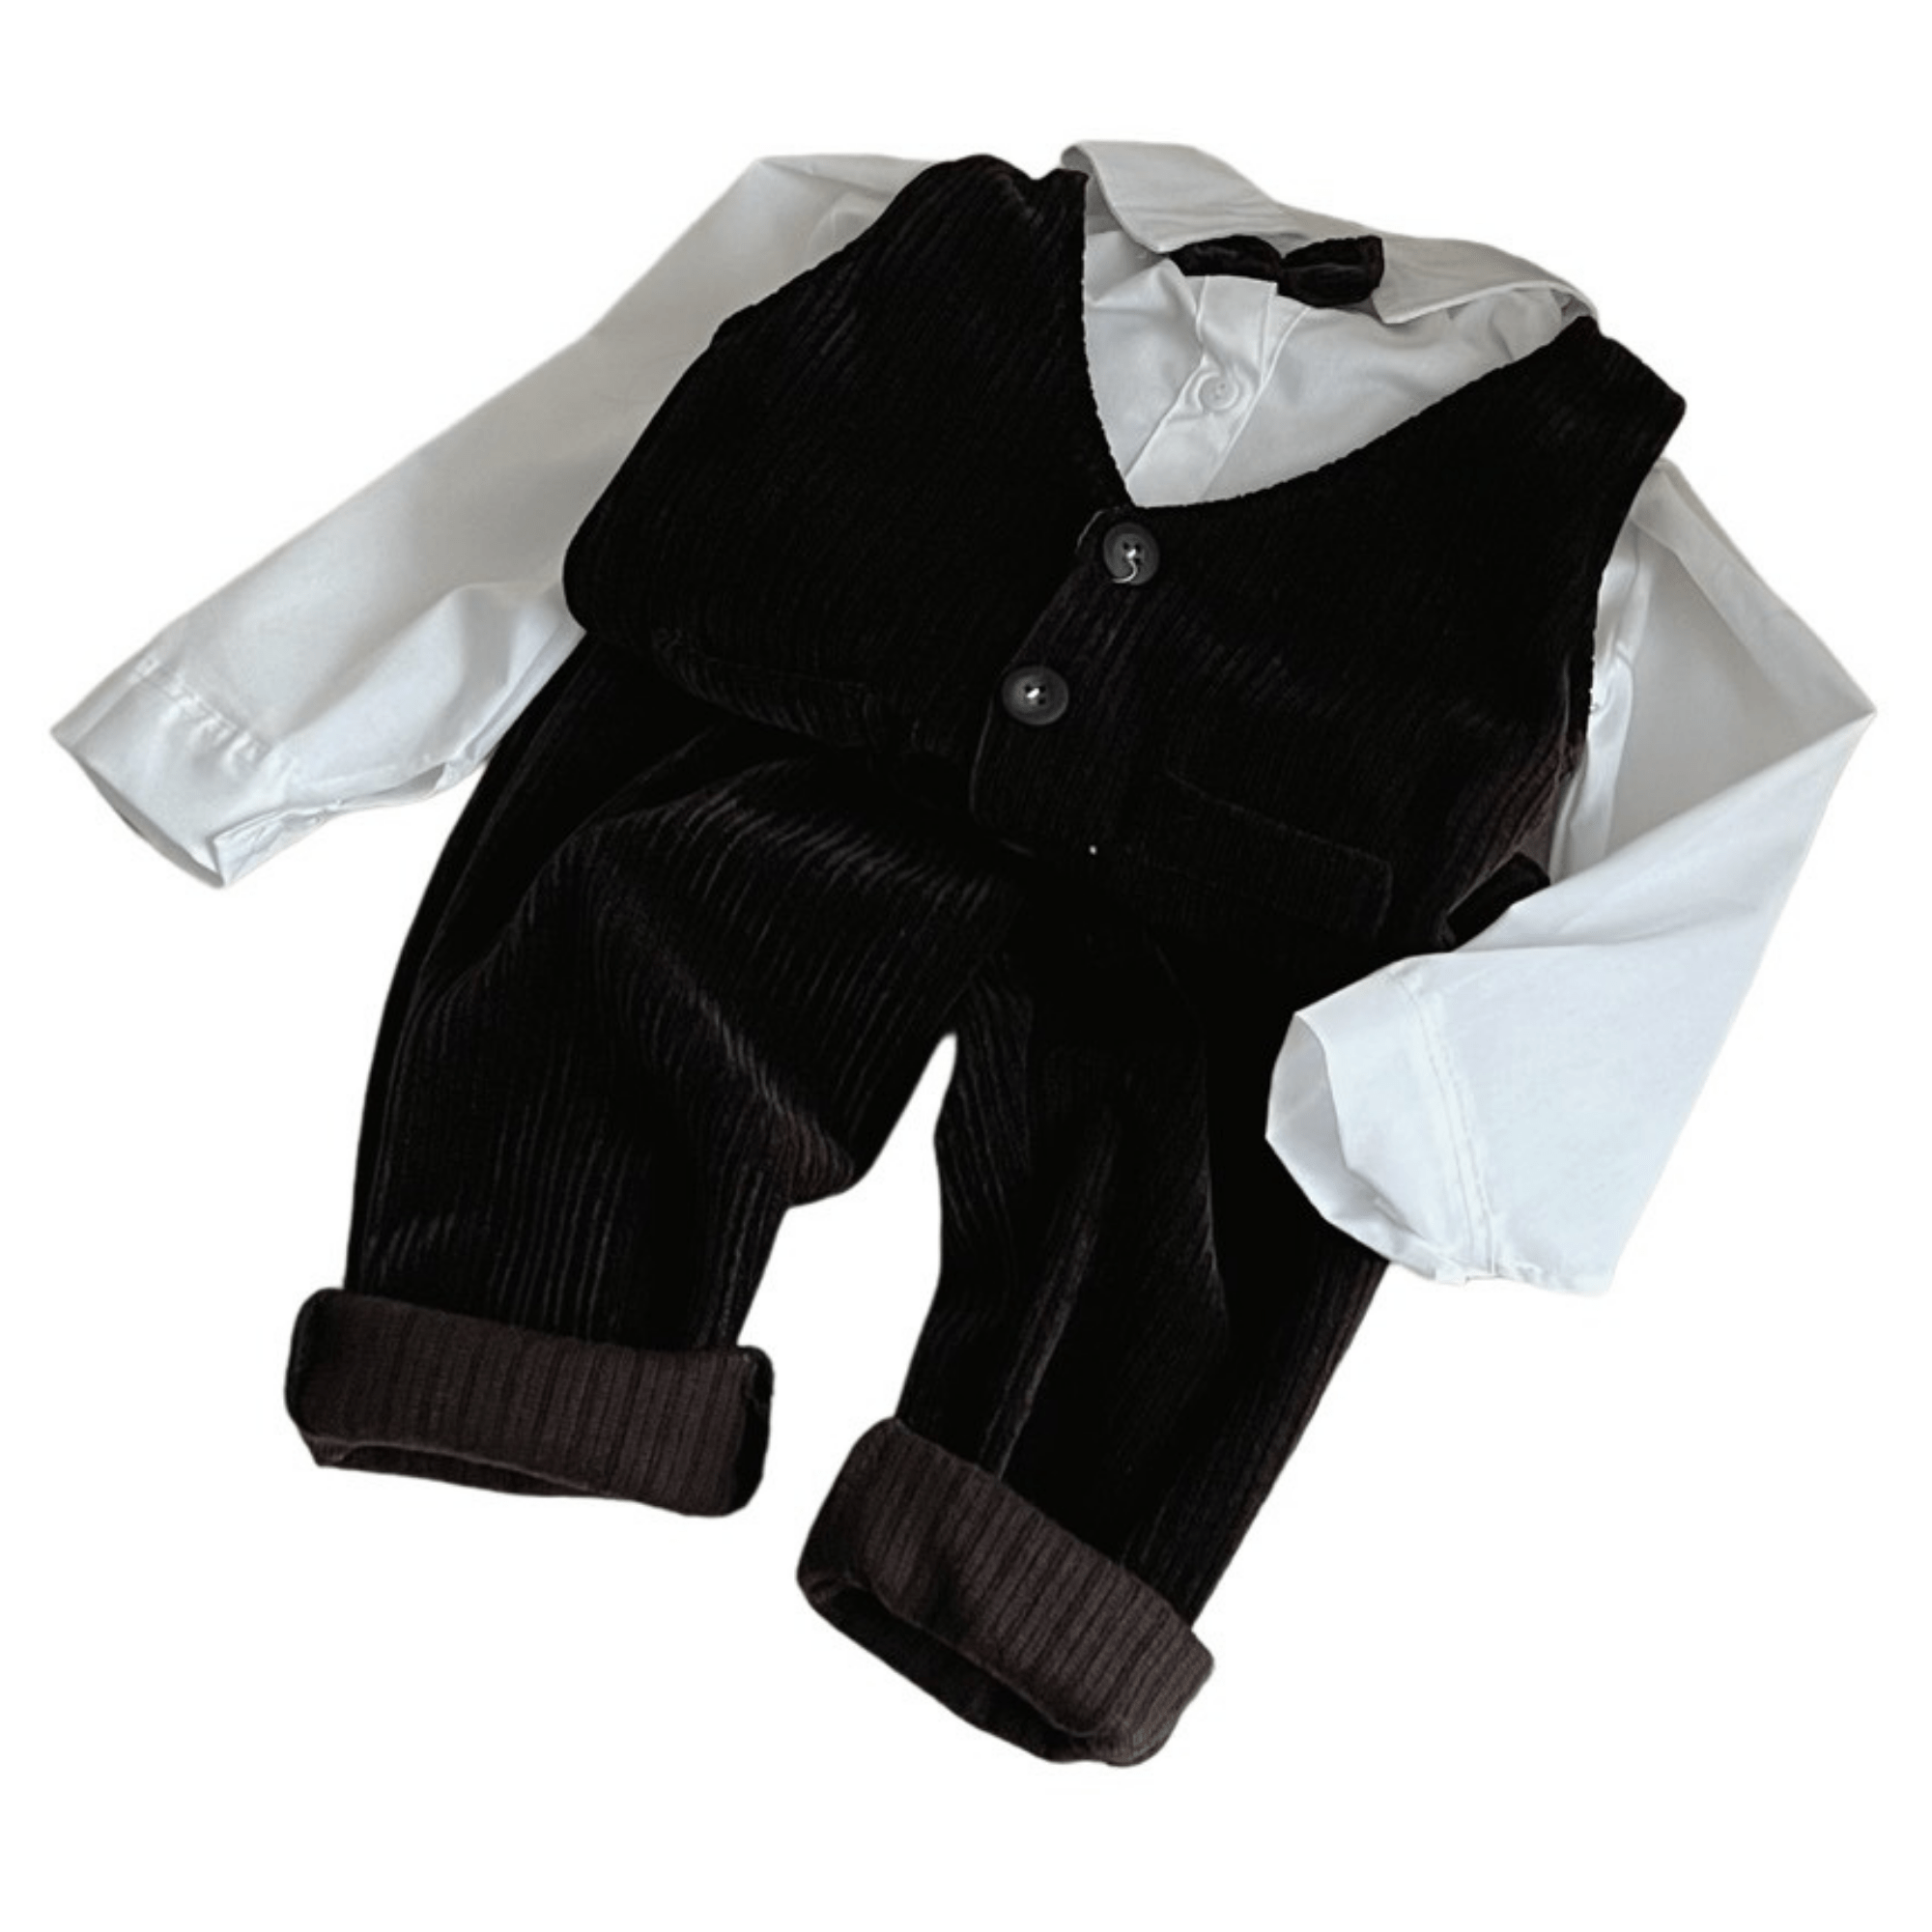 Clothes For Kids Factory Price Natural Baby Boys Set Cute Each One In Opp Bag Made In Vietnam Manufacturer